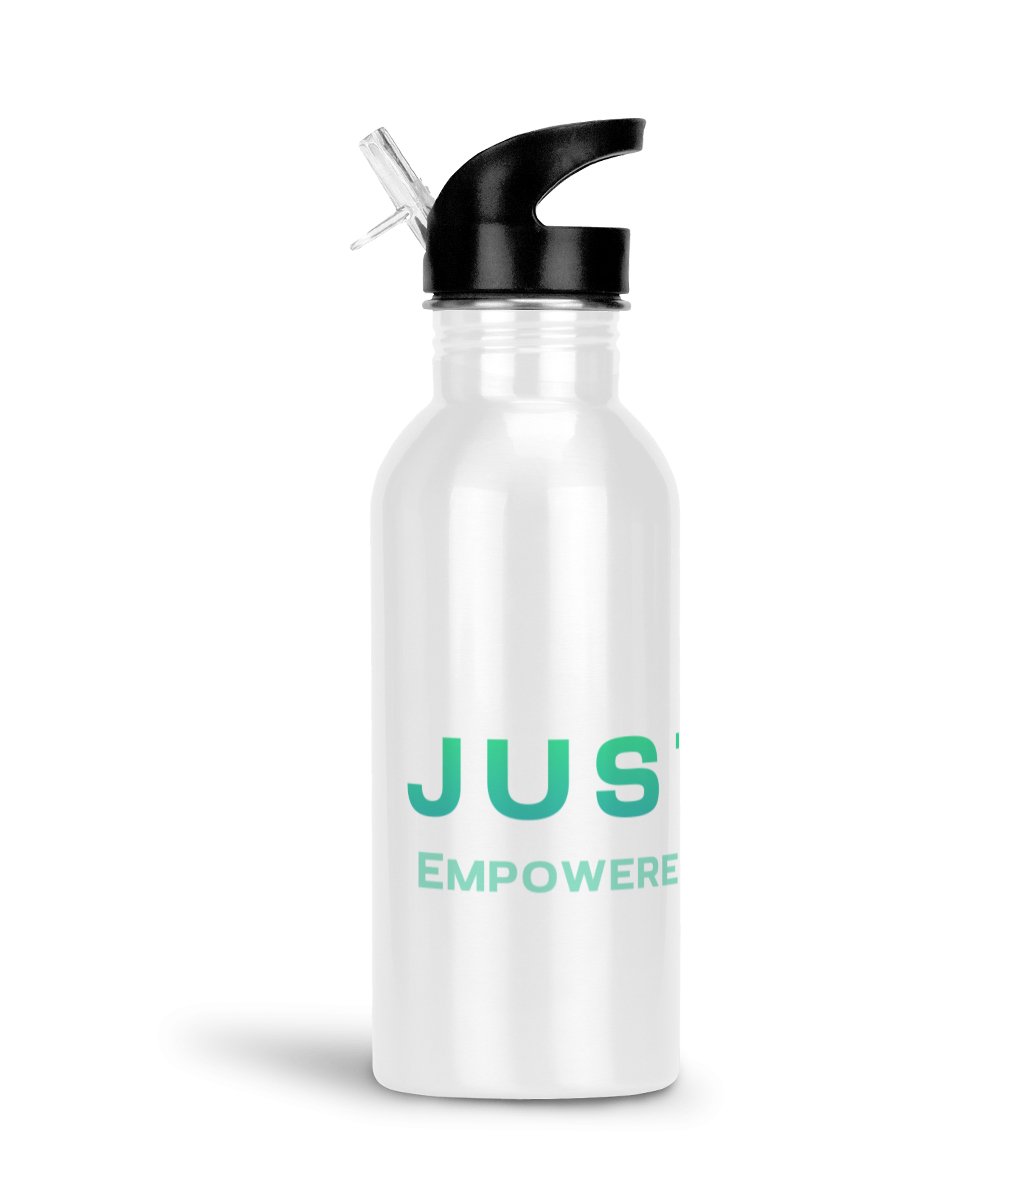 Just Flex - Empowered To Be Different Gym Fitness Water Bottle 600ml